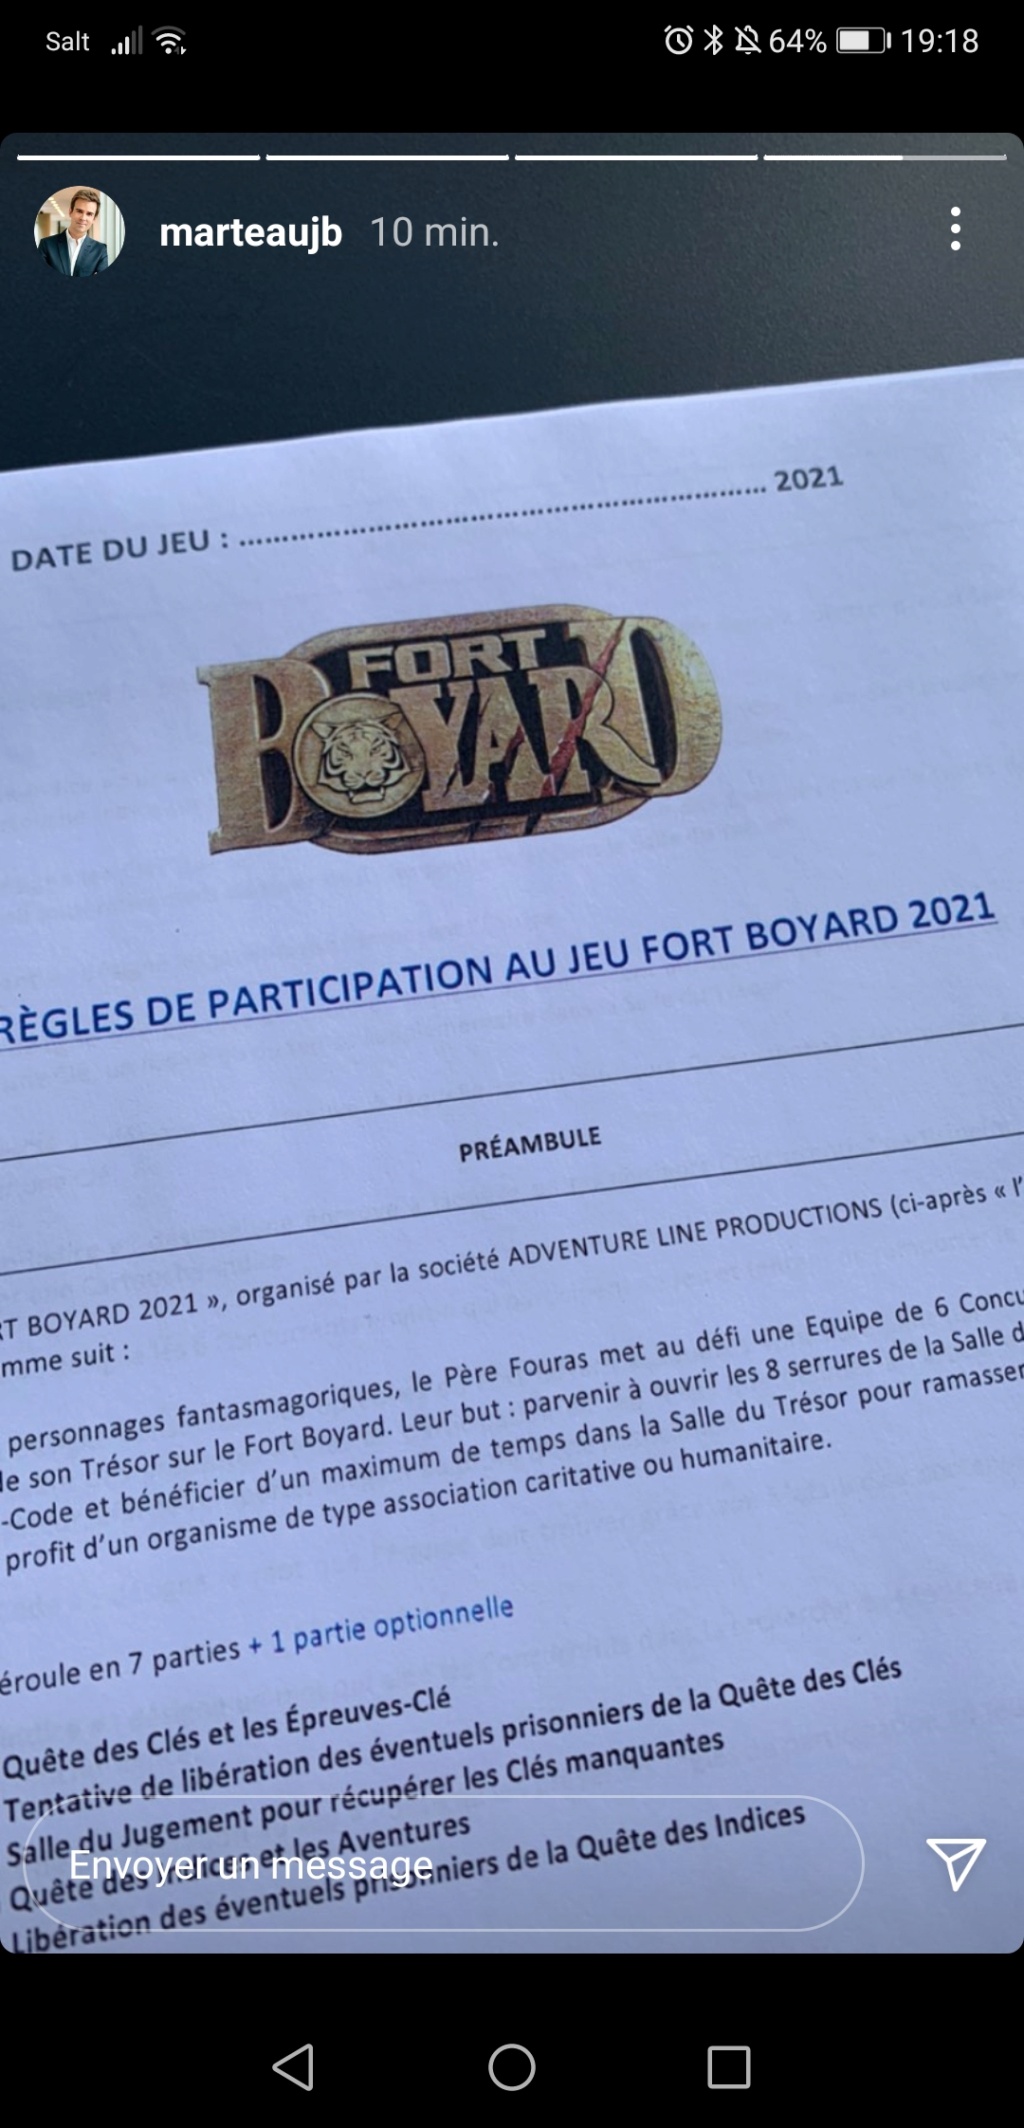 Photos des tournages Fort Boyard 2021 (production + candidats) - Page 25 Screen11